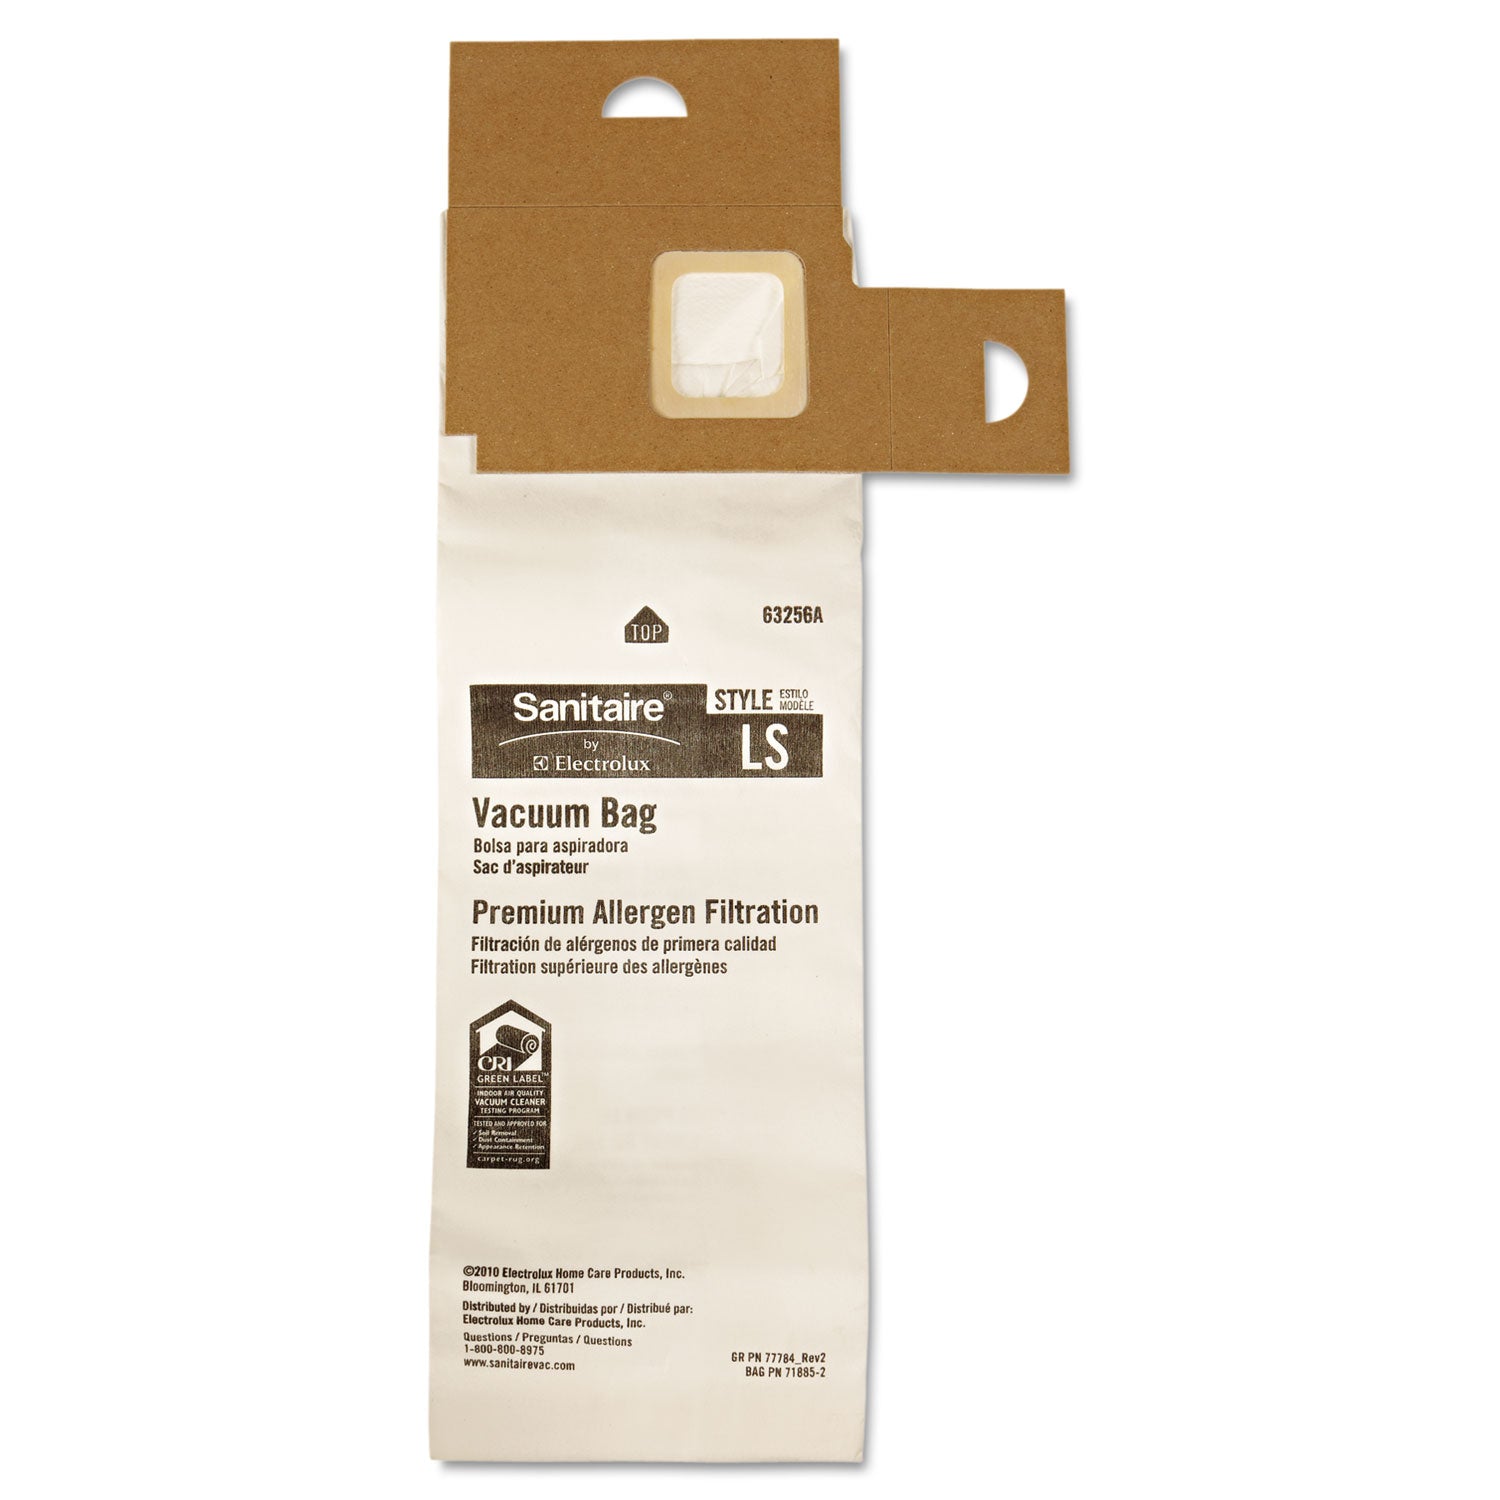 commercial-upright-vacuum-cleaner-replacement-bags-style-ls-5-pack-10-packs-carton_eur63256a10ct - 2